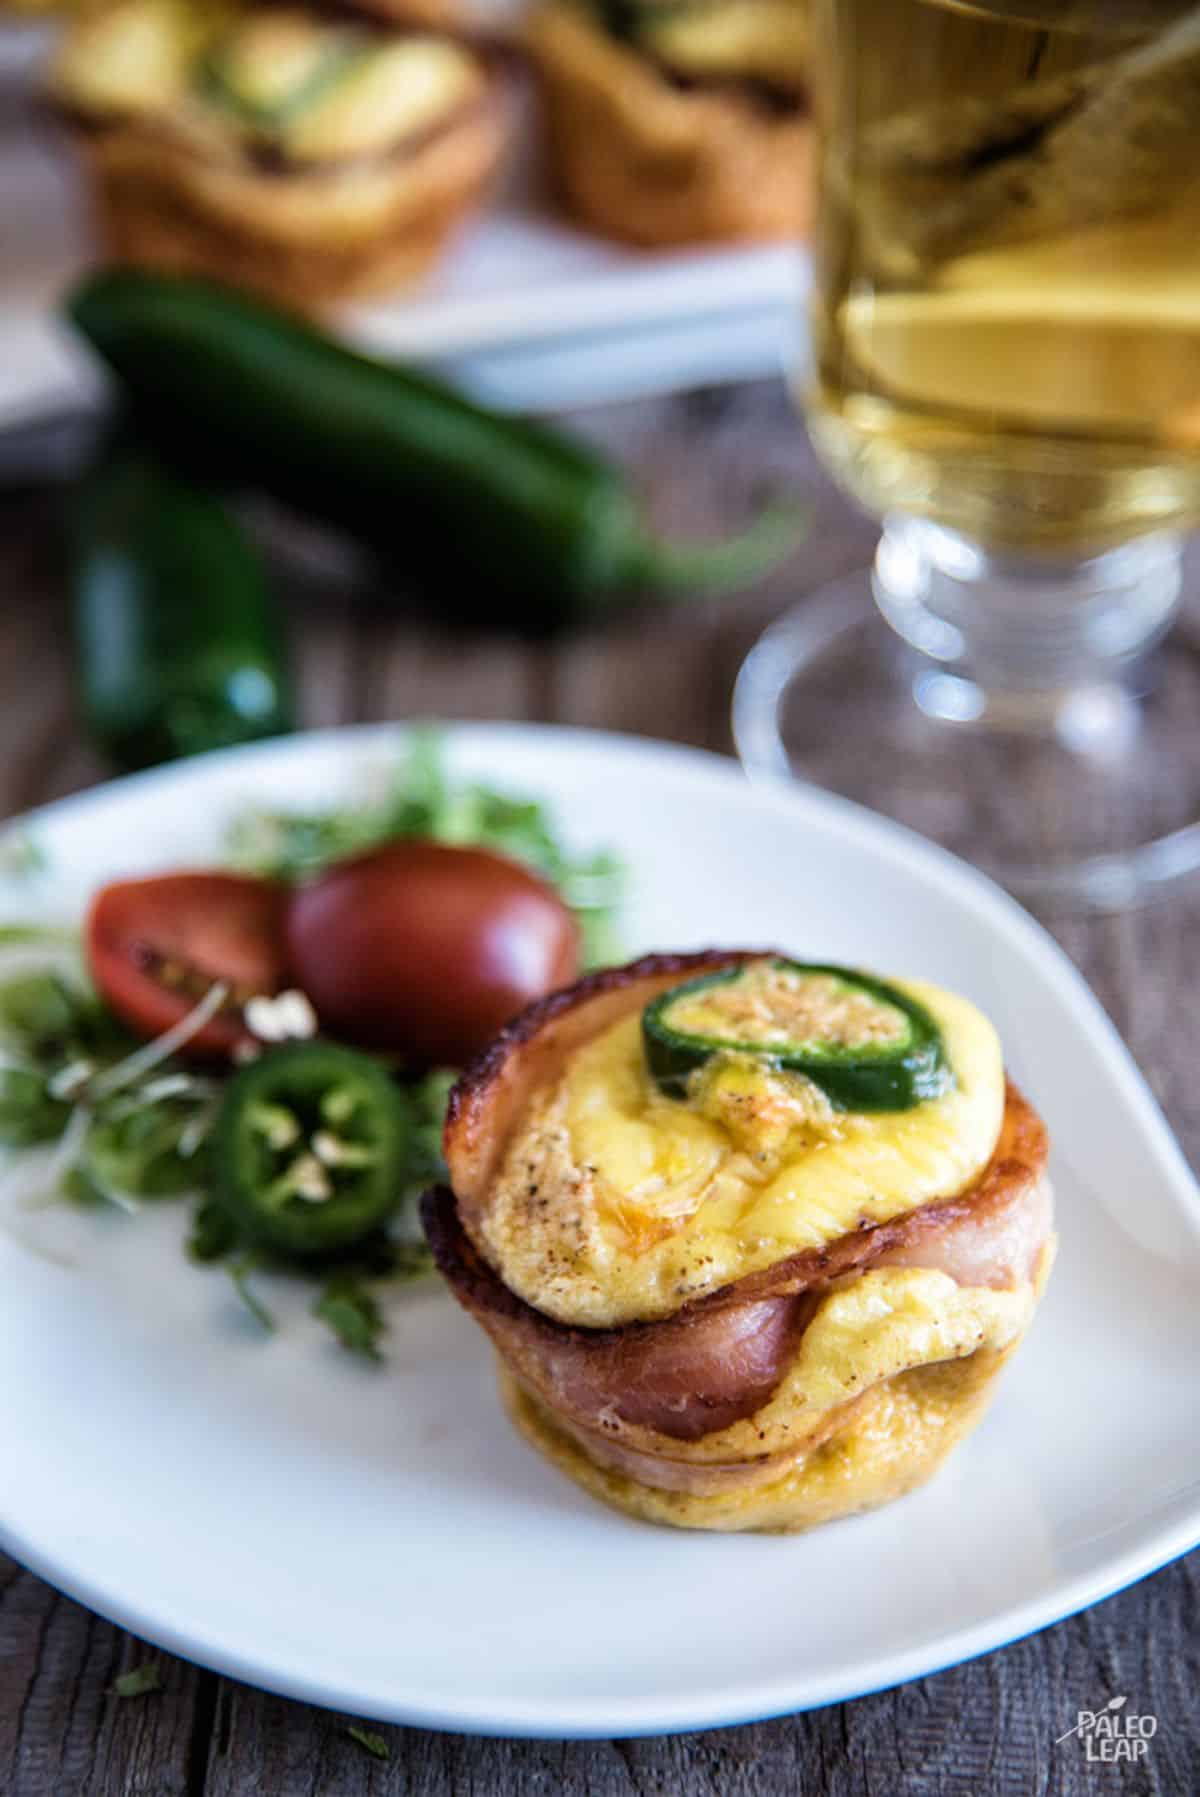 Jalapeno-Bacon Egg Cups